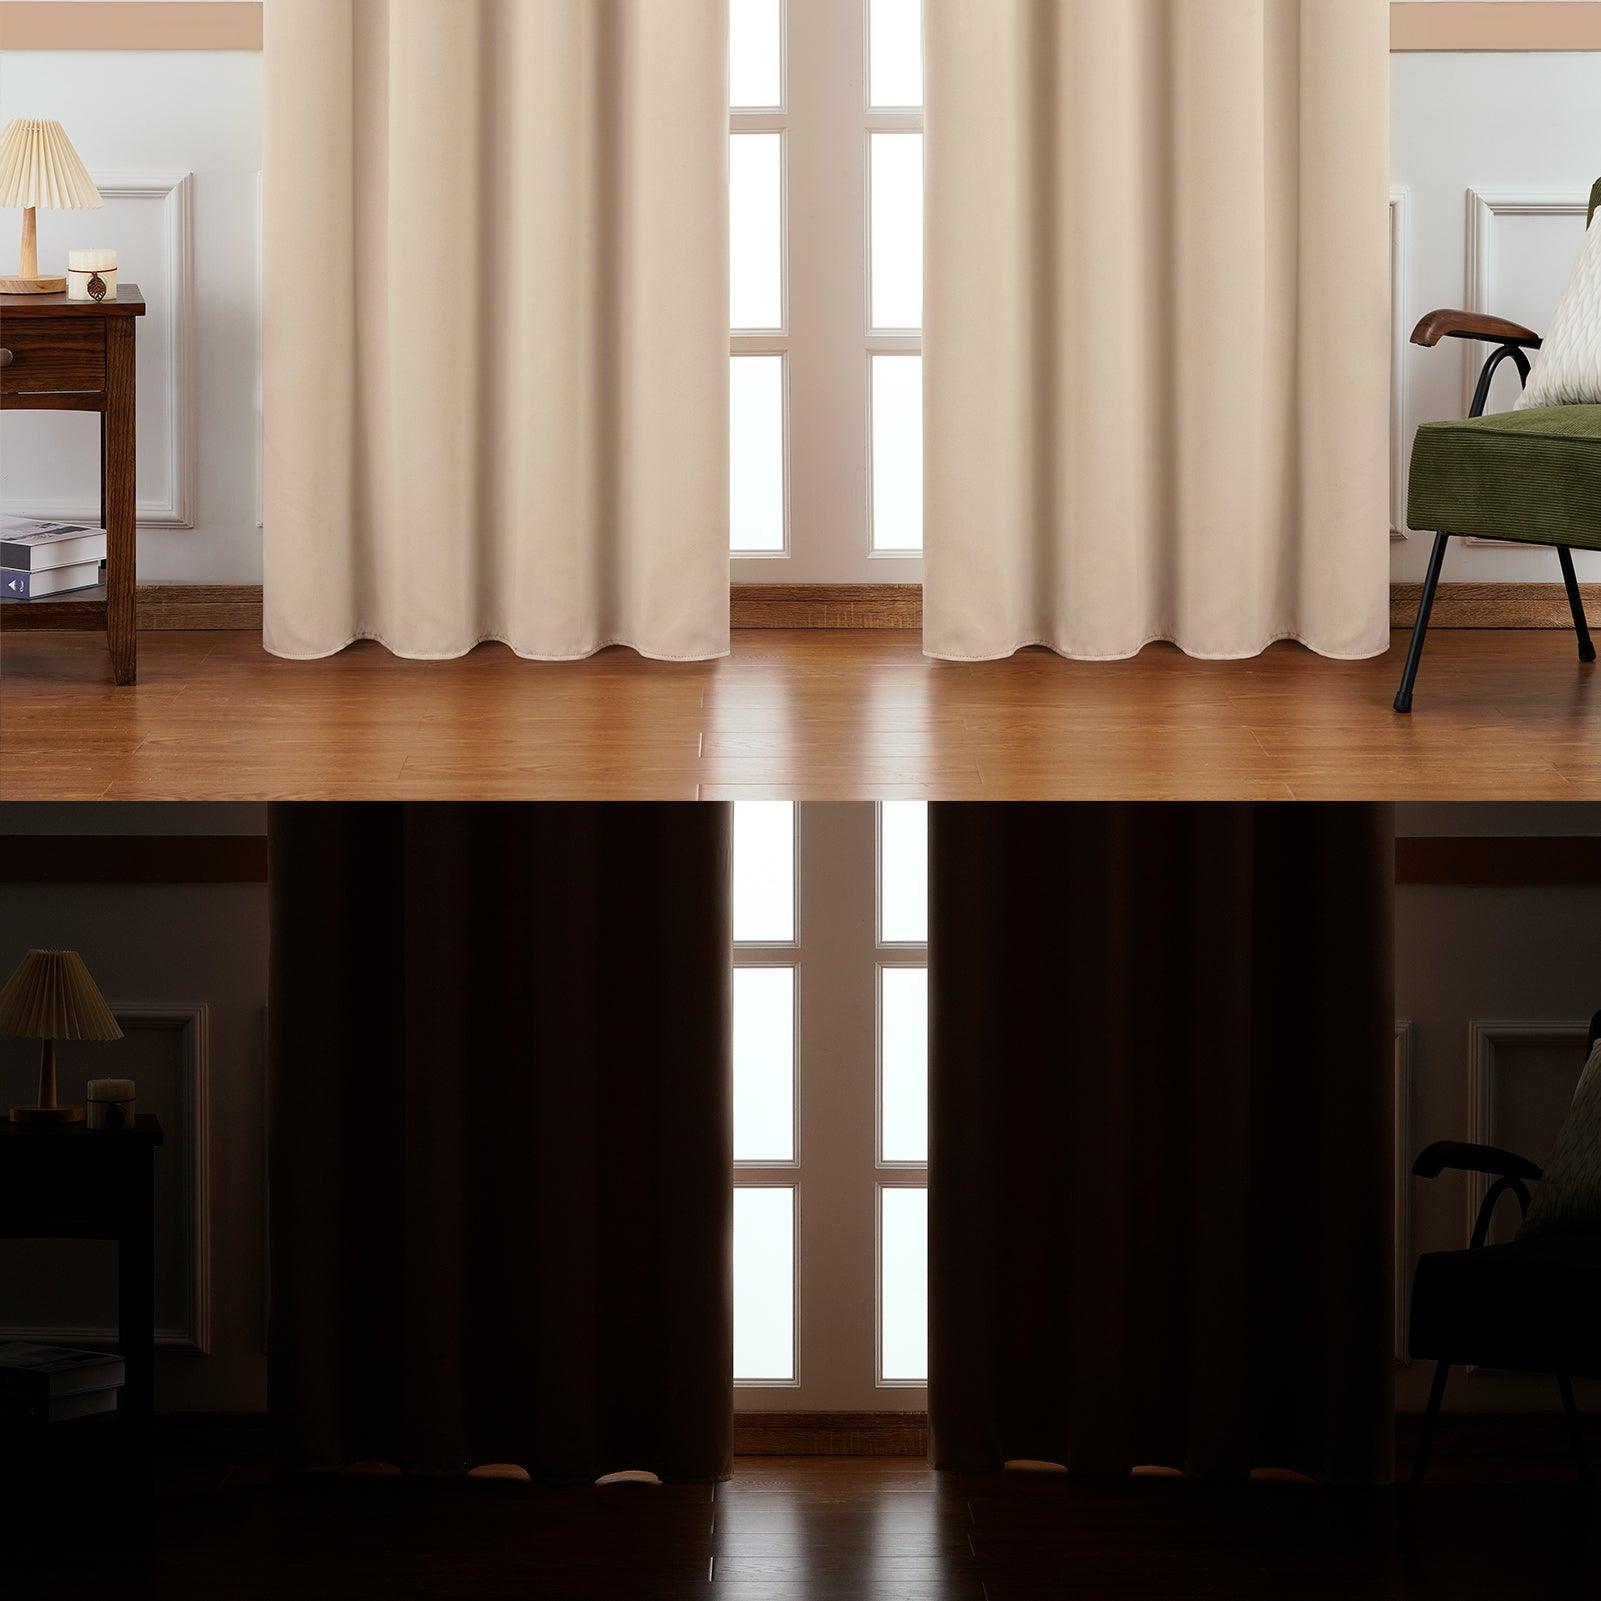 Diy Room Divider Curtains -Aburto Solid Color Blackout Thermal Curtains Suit Insomniac For Bedroom,1 Panel - Topfinel